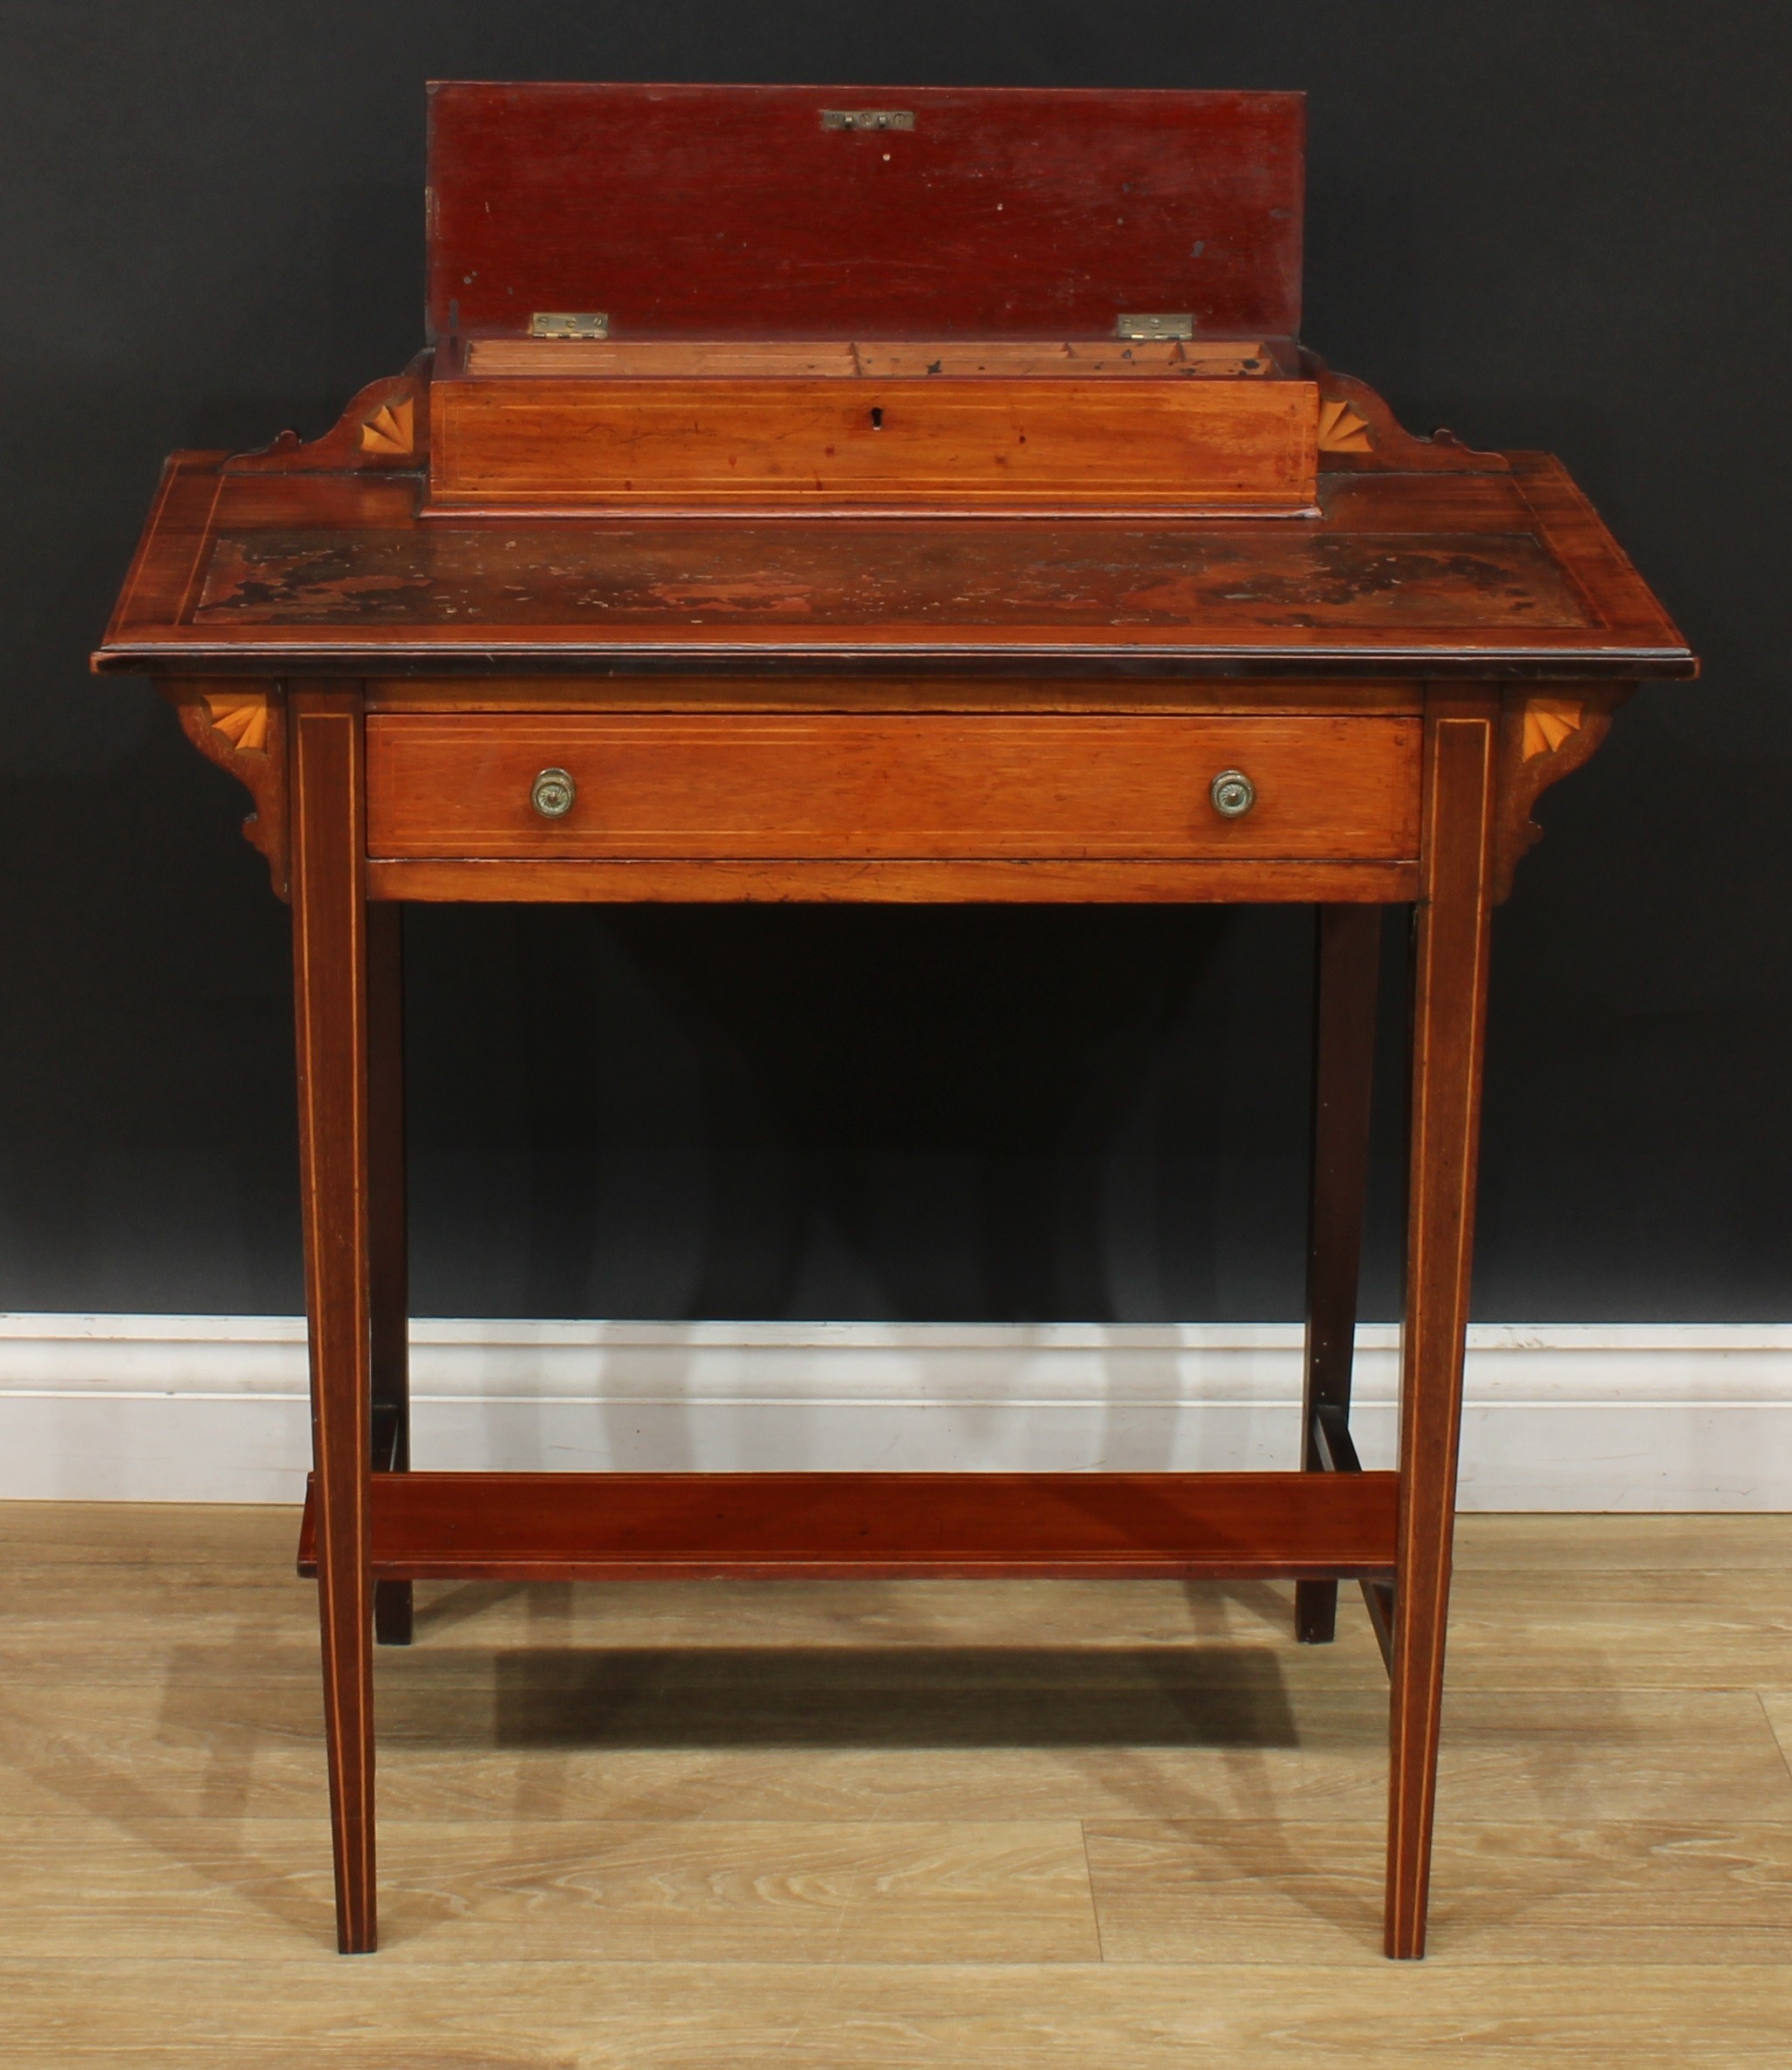 An Edwardian mahogany and marquetry desk, 82cm high, 76cm wide, 44.5cm deep, c.1905 - Image 2 of 4